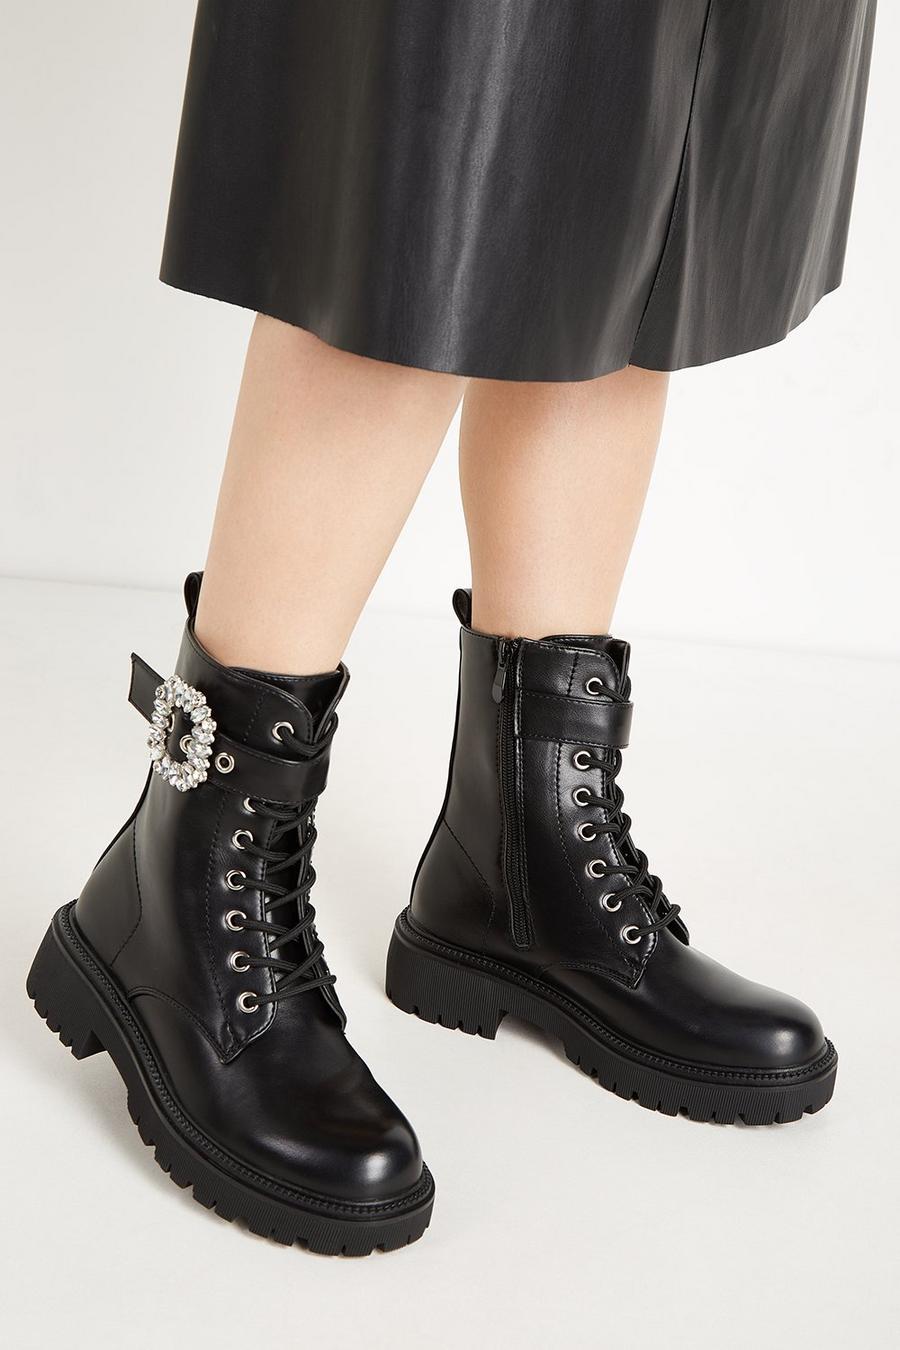 Milly Embellished Buckle Boot